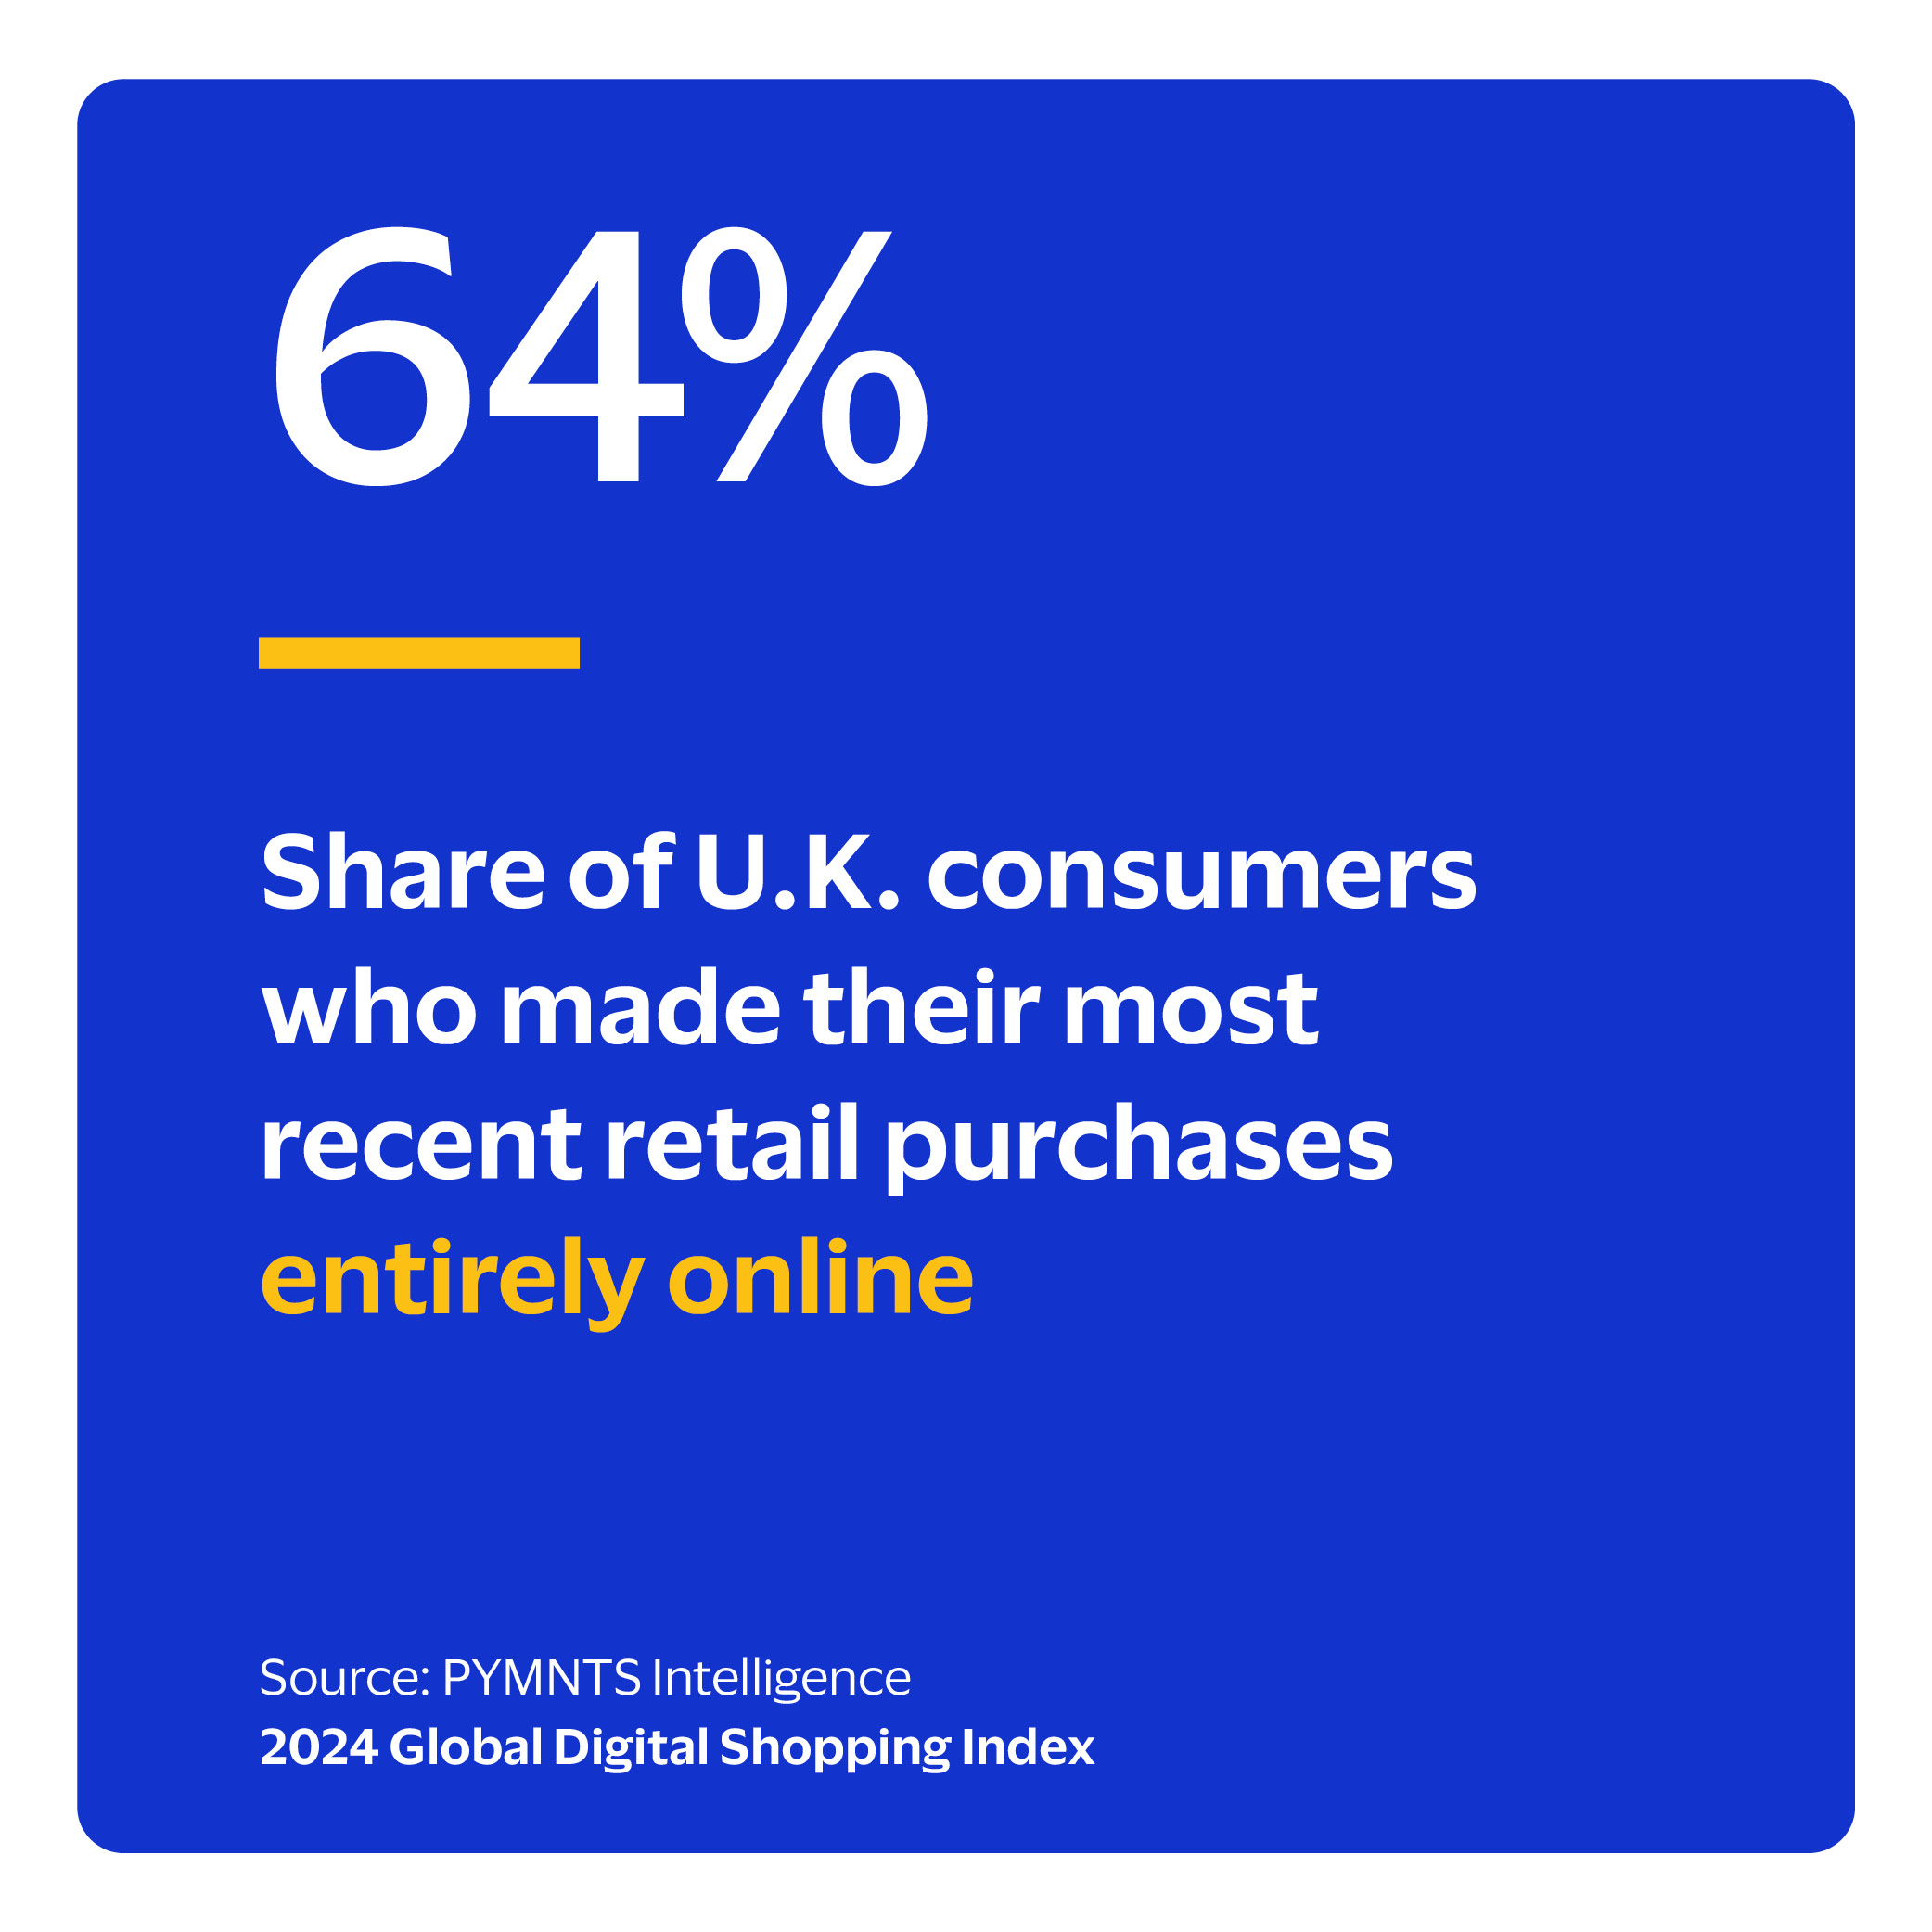 64%: Share of U.K. remote shoppers who made their most recent retail purchase entirely online